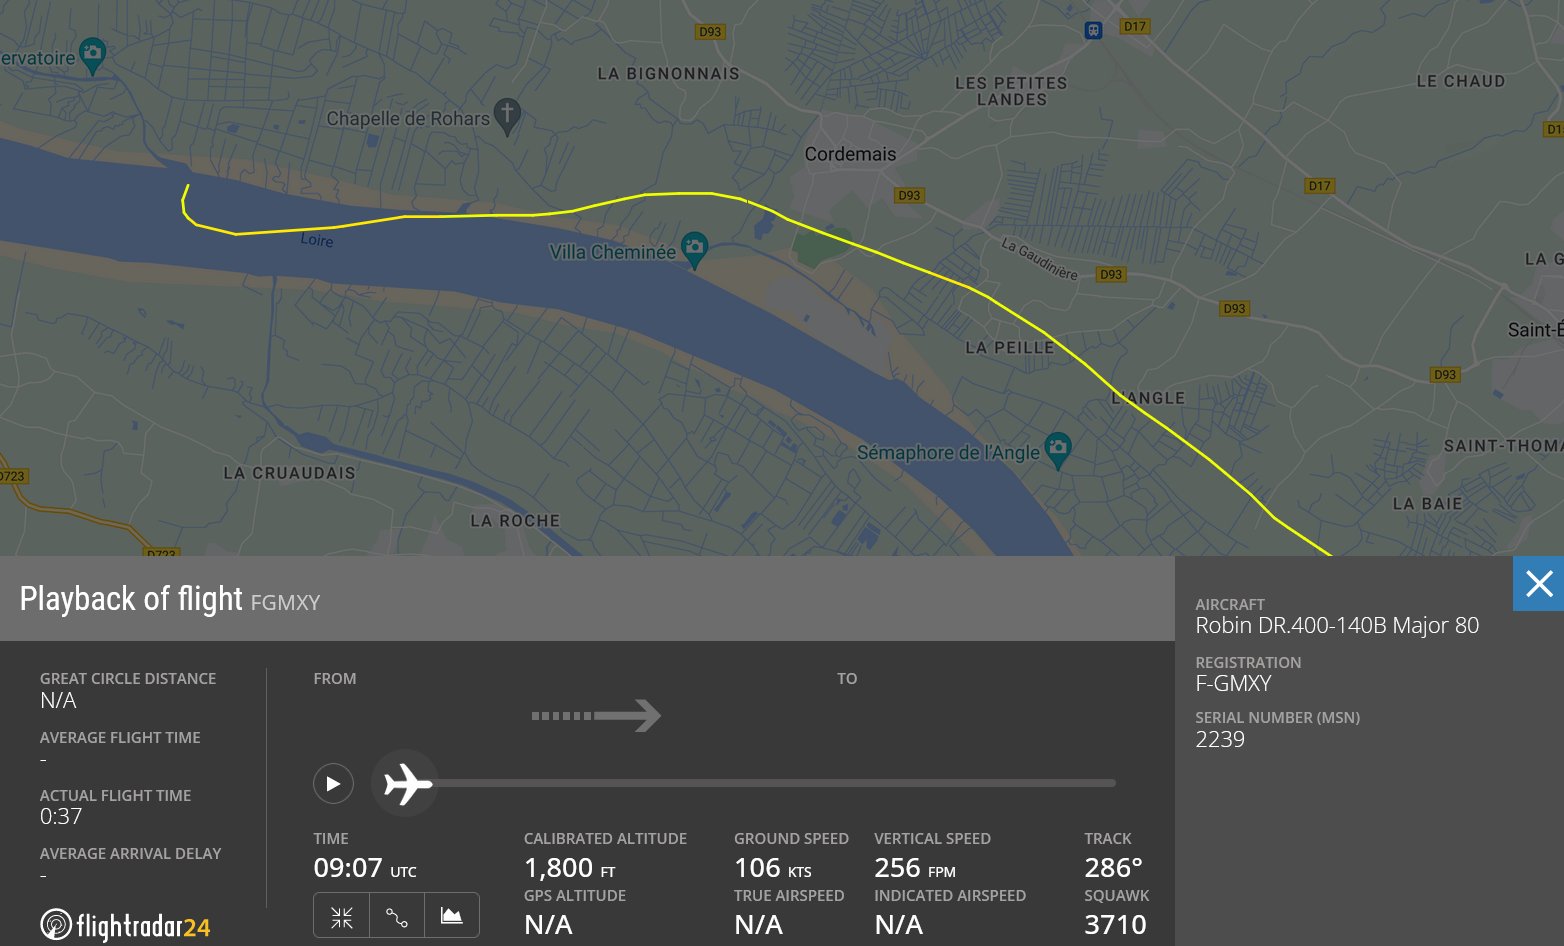 Robin DR.400 private aircraft crashes into Loire river, three passengers presumed dead